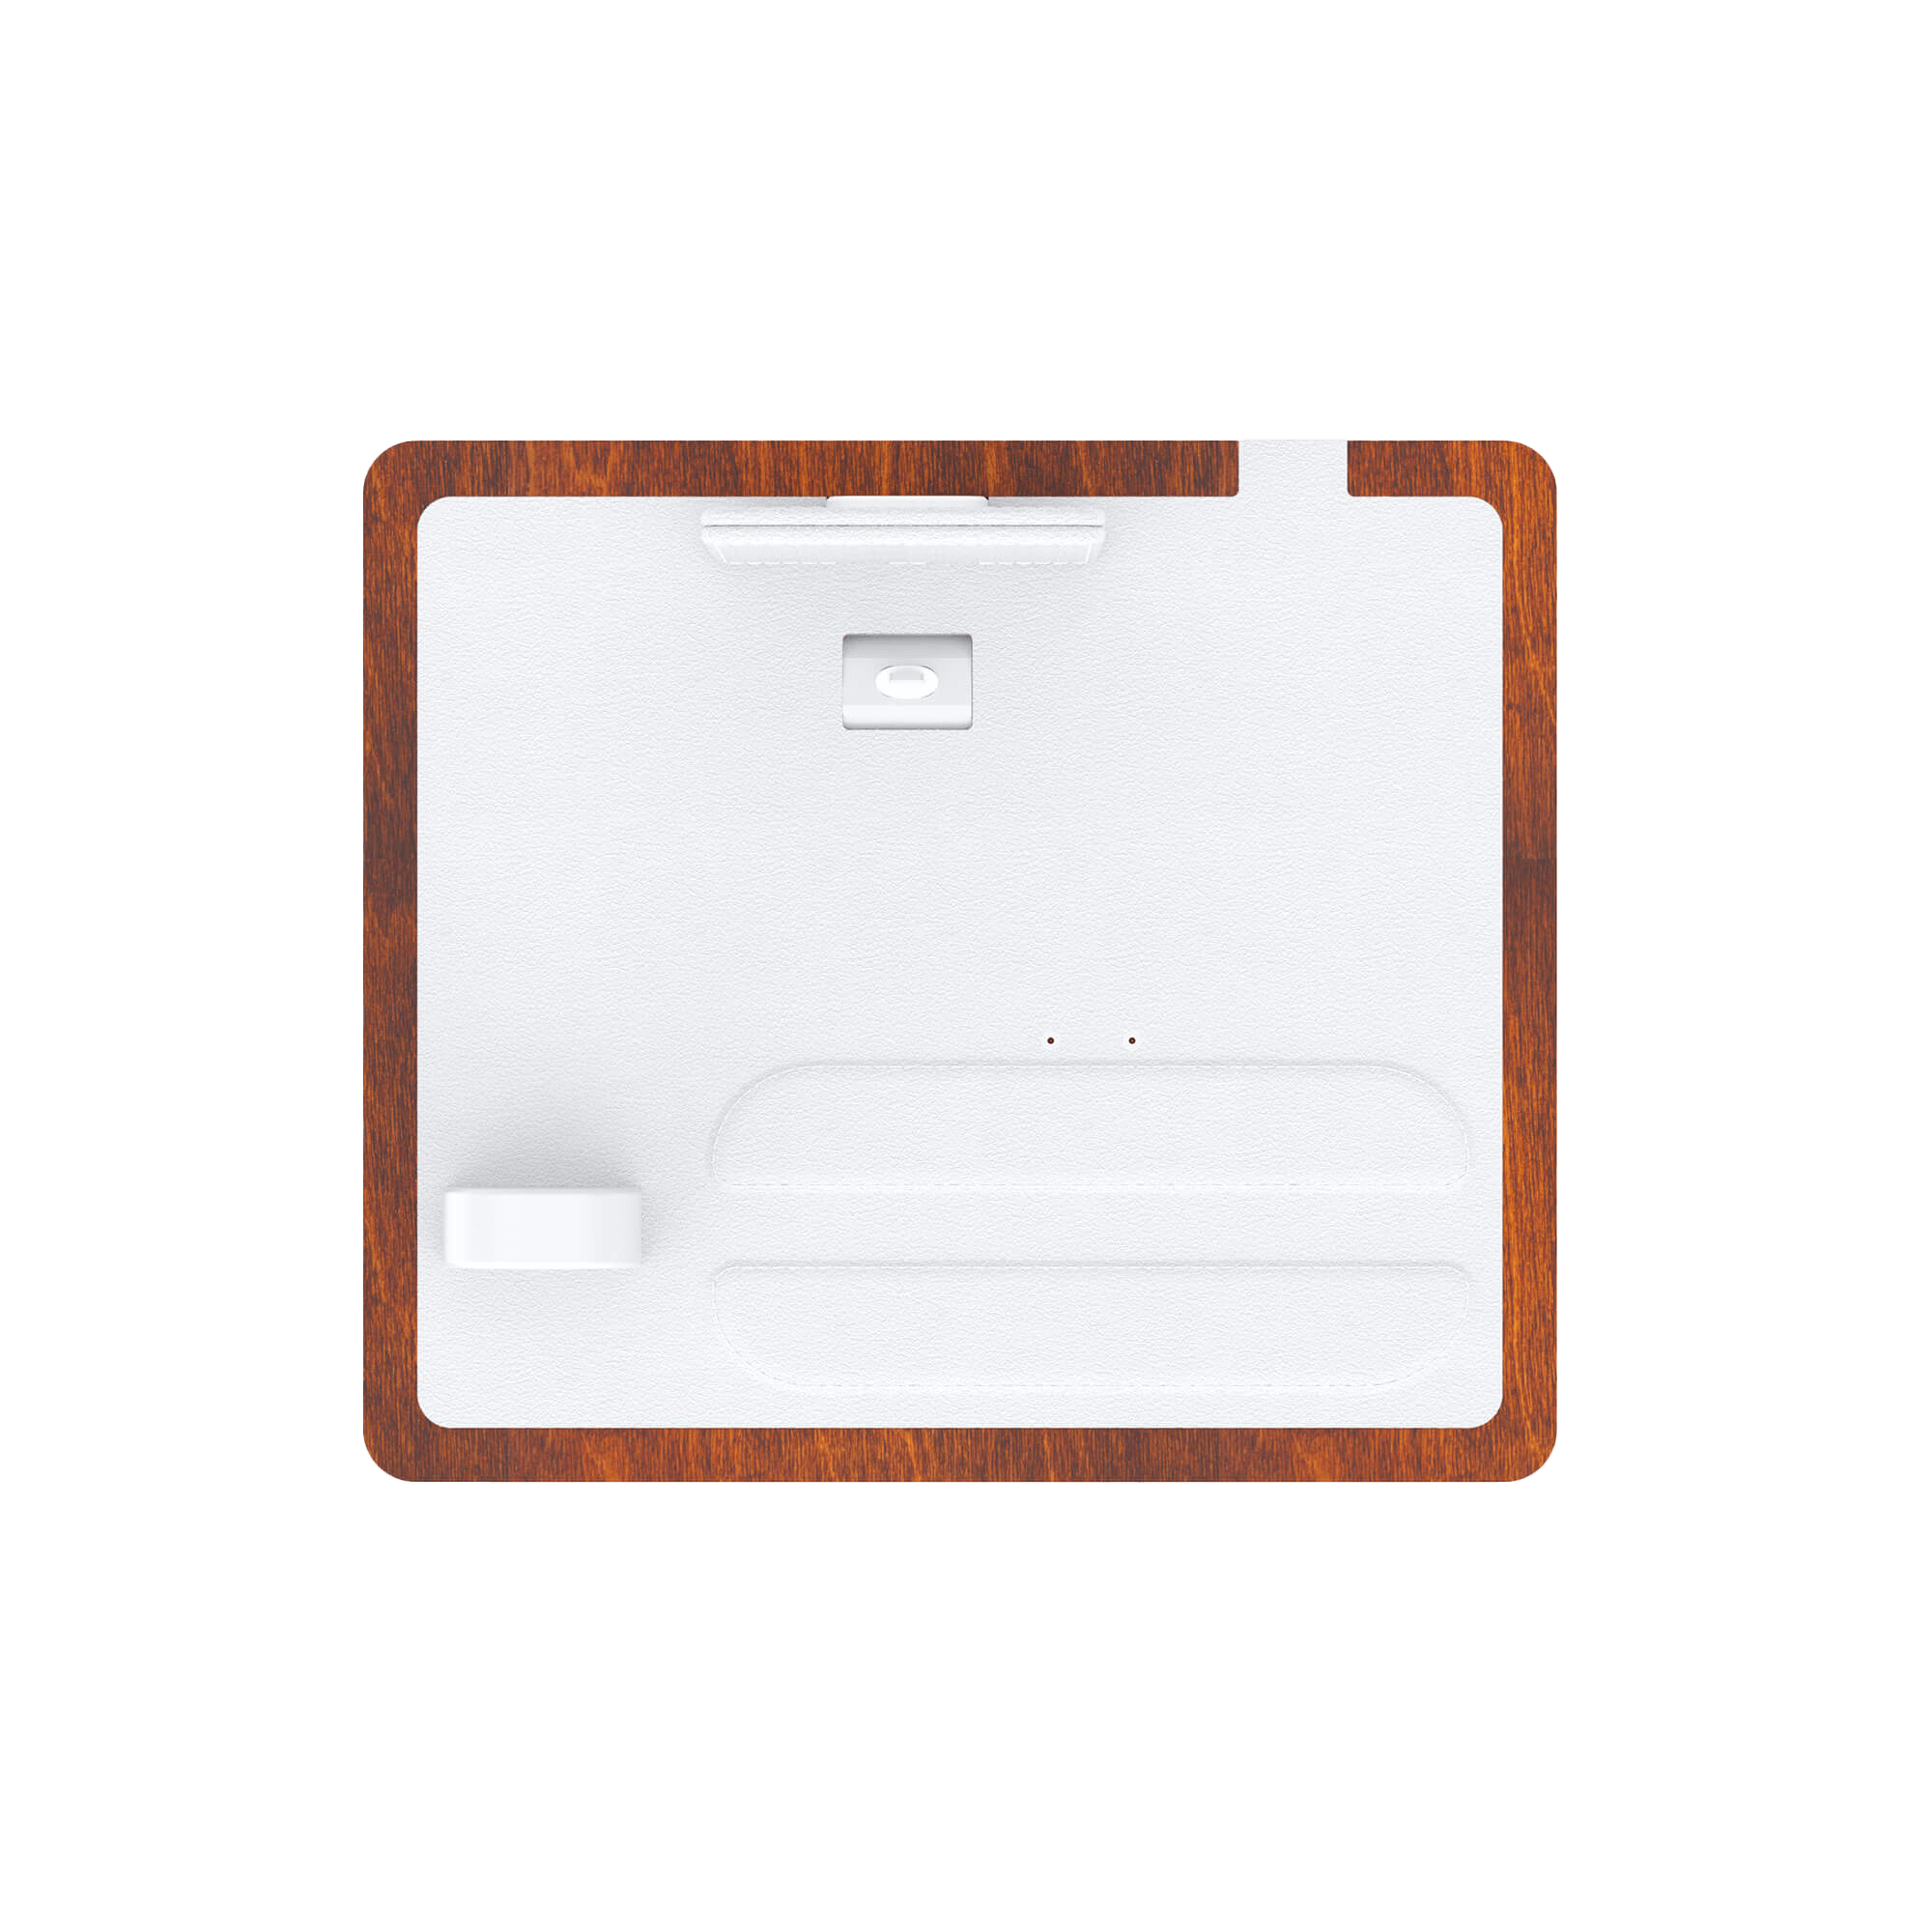 NYTSTND QUAD white leather top, oak wood base, front view without devices